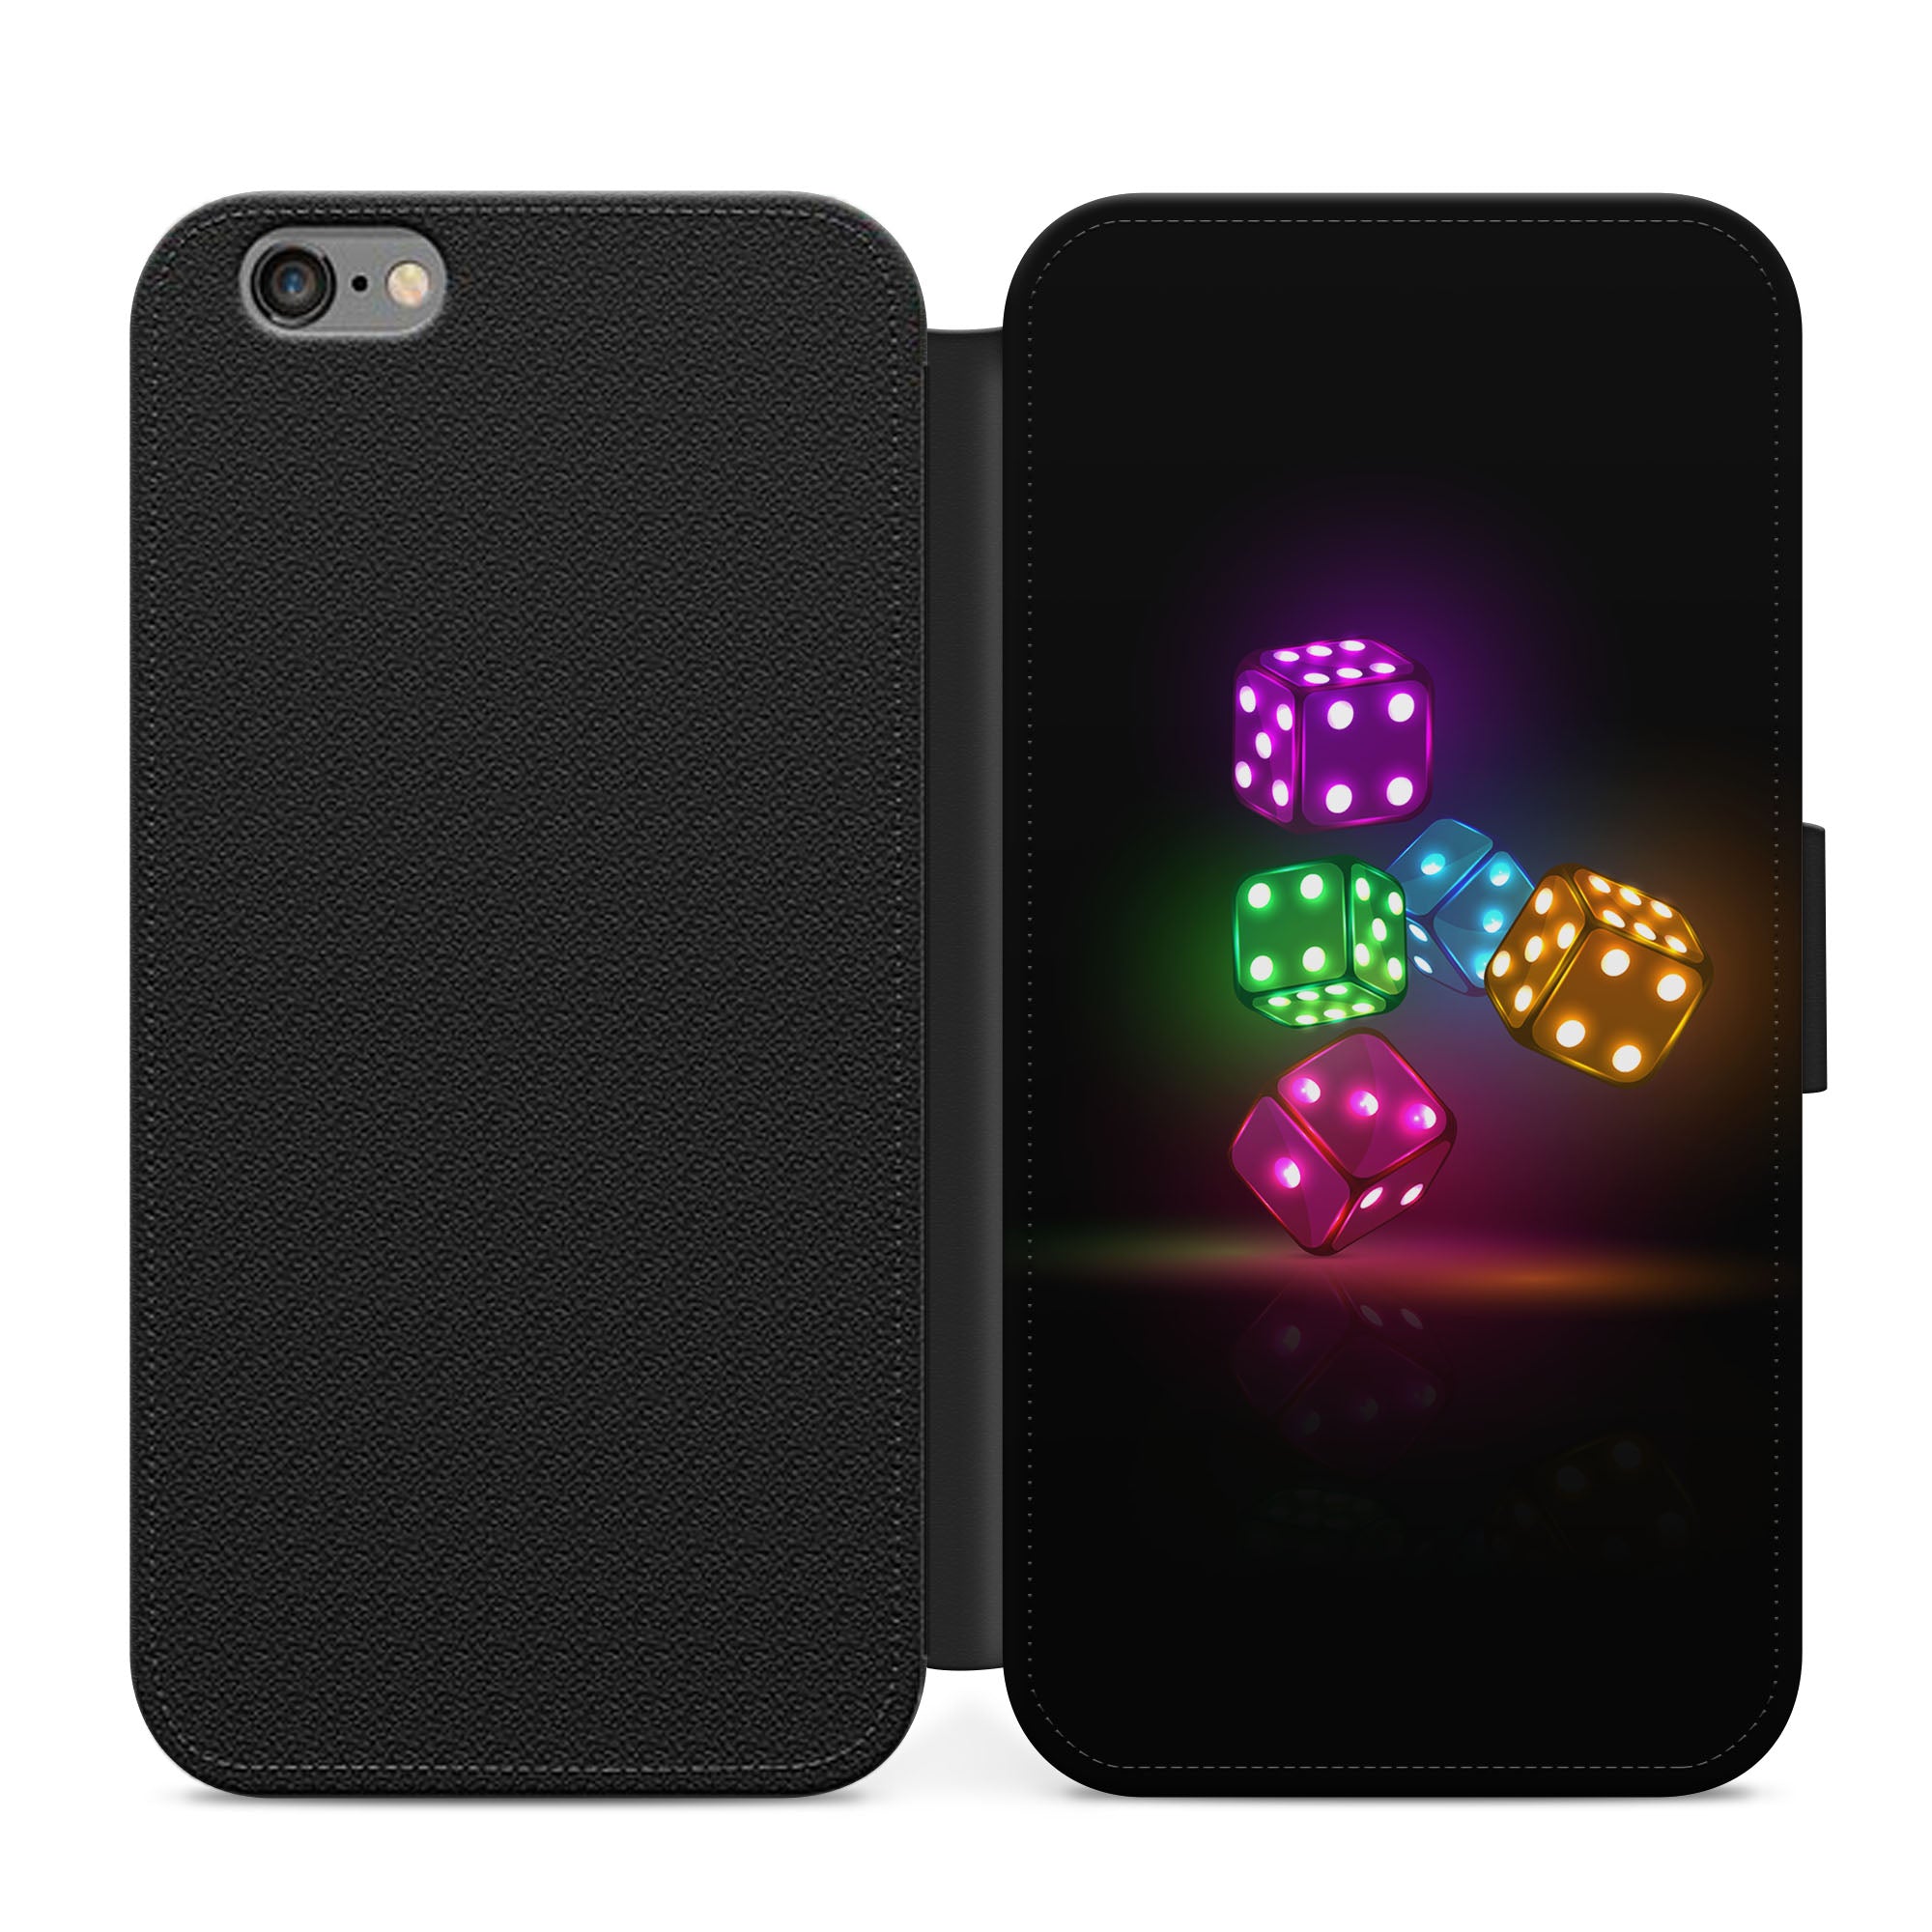 Neon Dice Faux Leather Flip Case Wallet for iPhone / Samsung